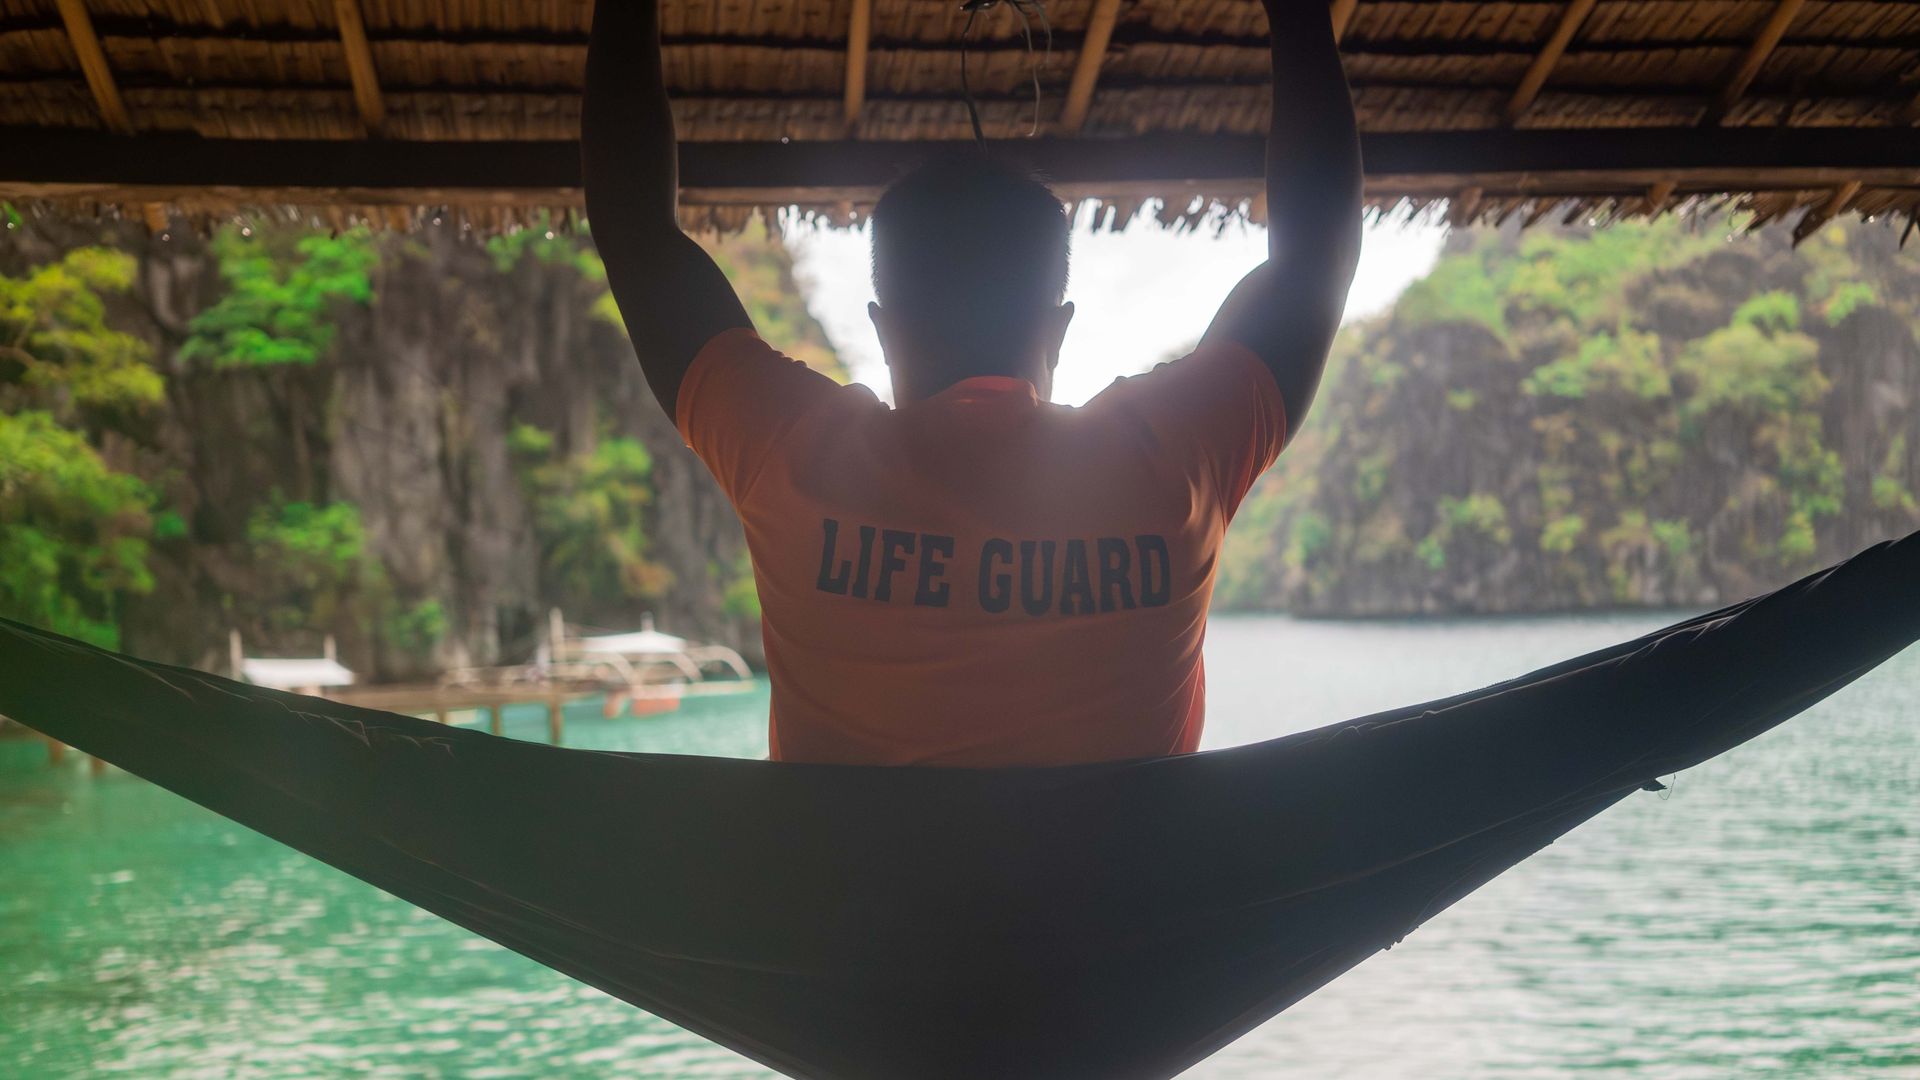 Mr Aguilar, watching over the waters from a hammock while on lifeguard duty, is happy that the tourists have returned. PHOTO: VINA SALAZAR